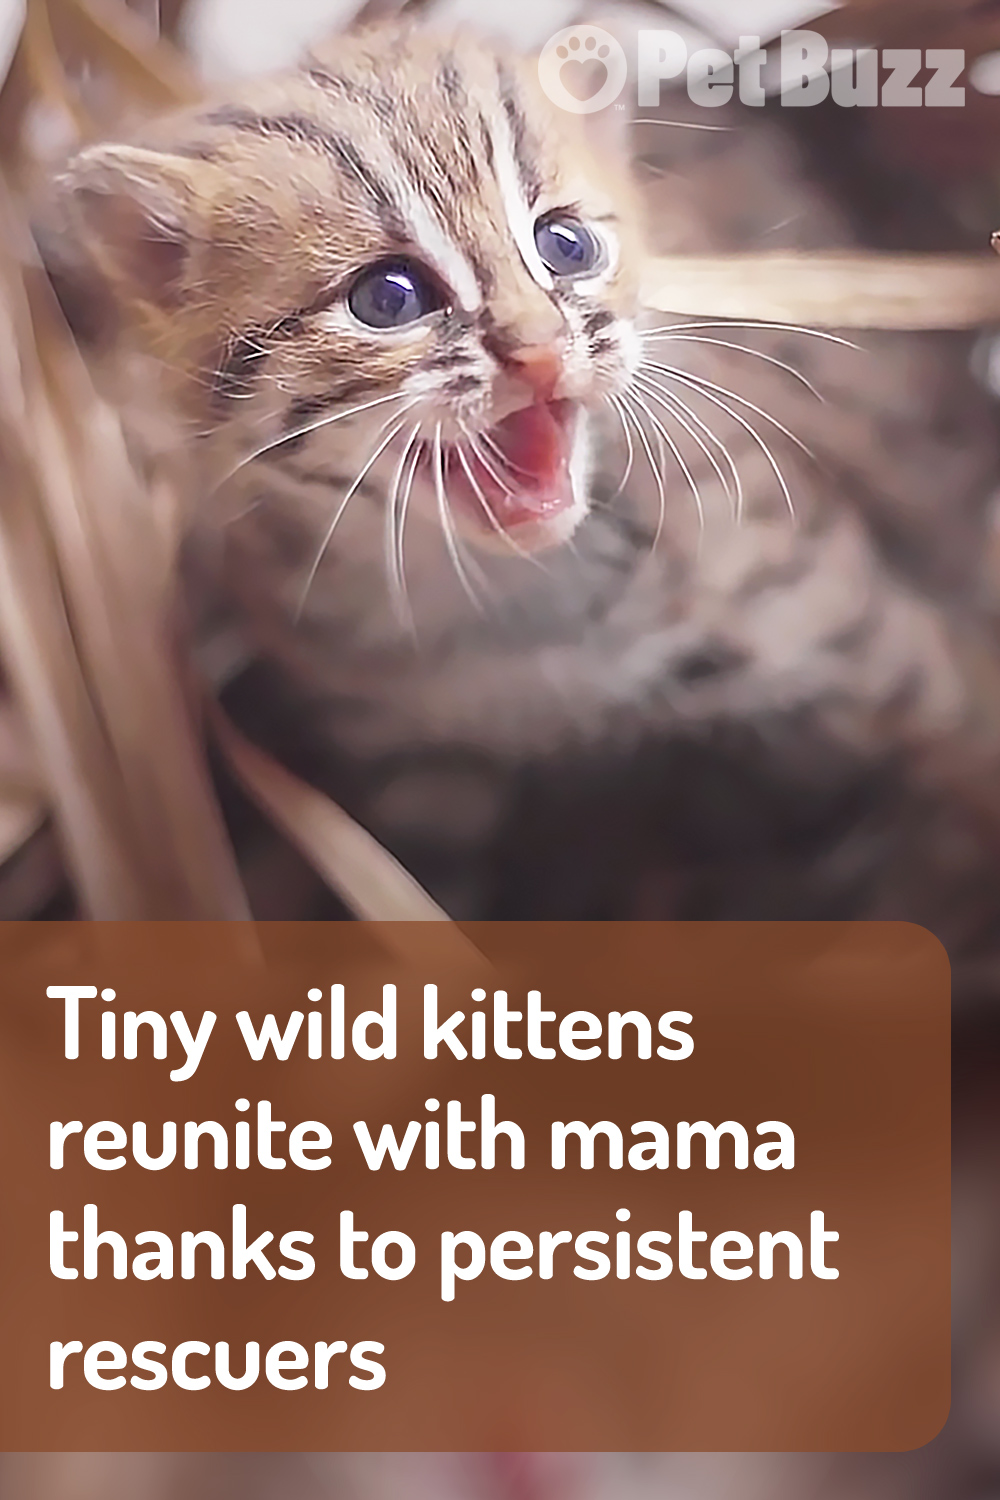 Tiny wild kittens reunite with mama thanks to persistent rescuers